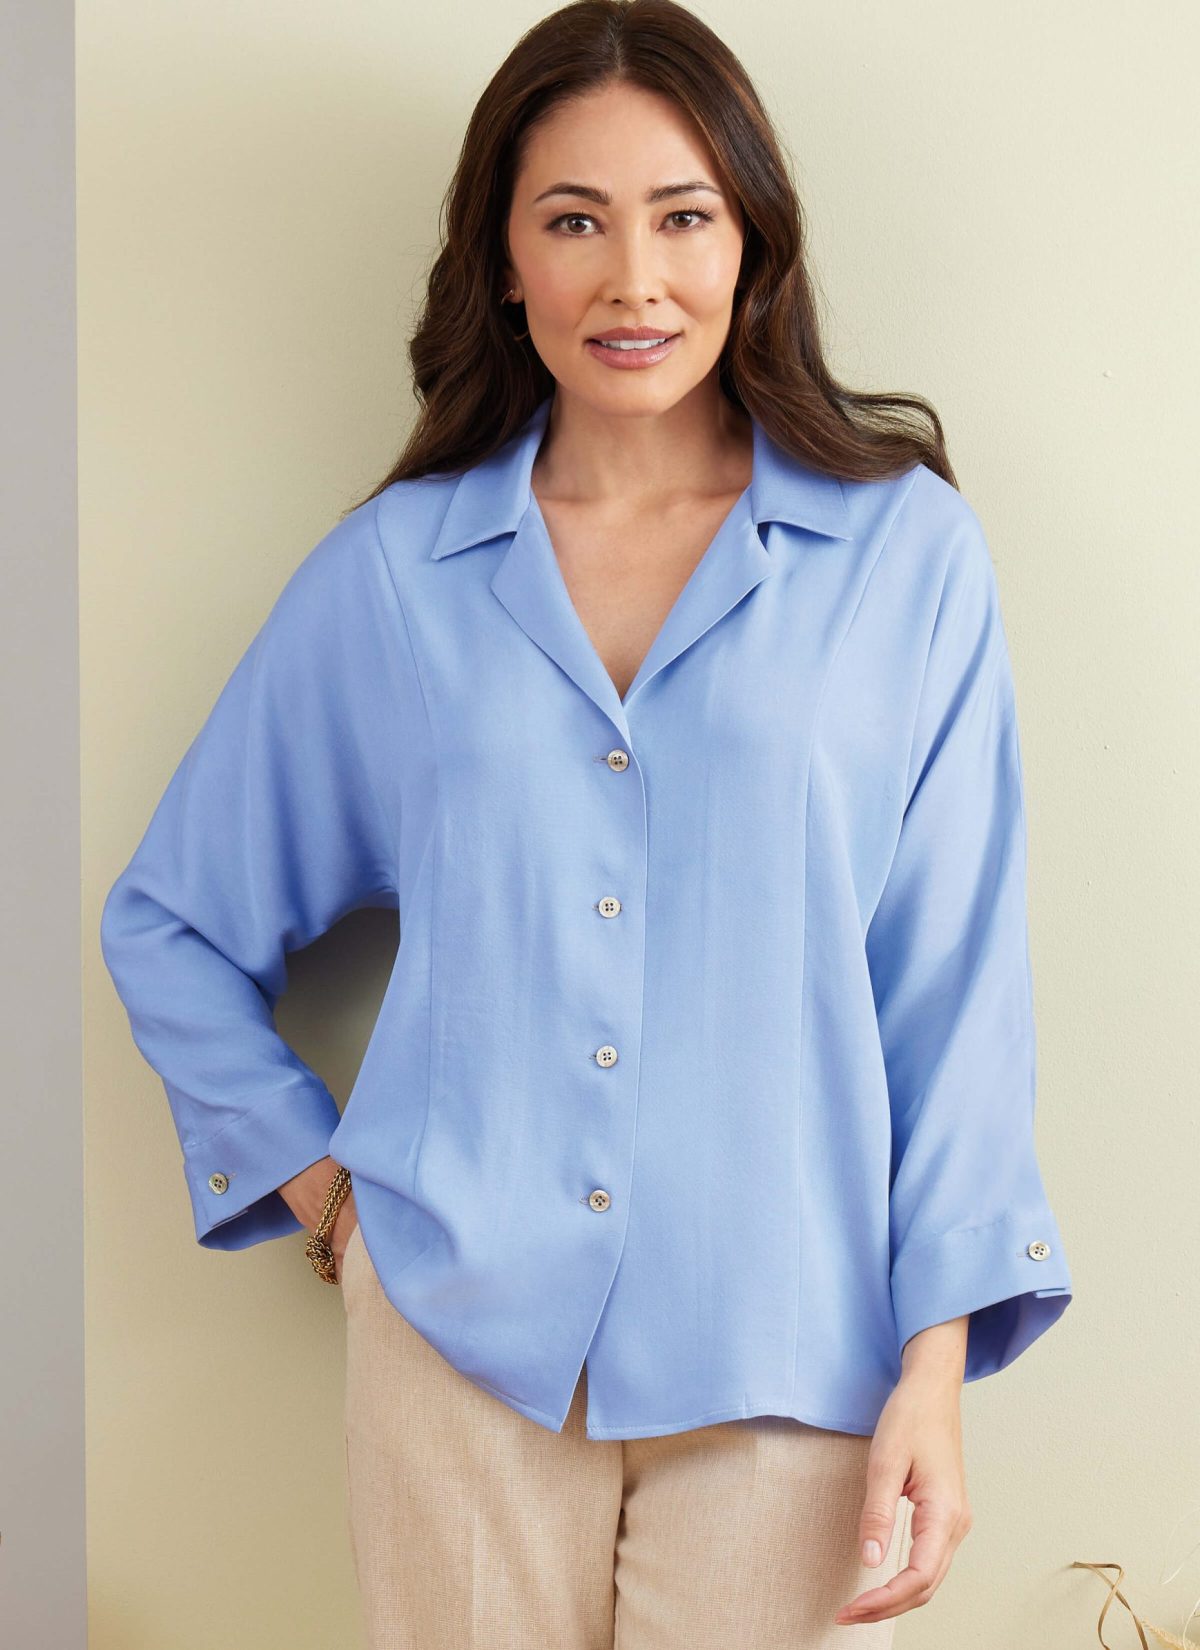 Butterick Sewing Pattern B6898 Misses' Top